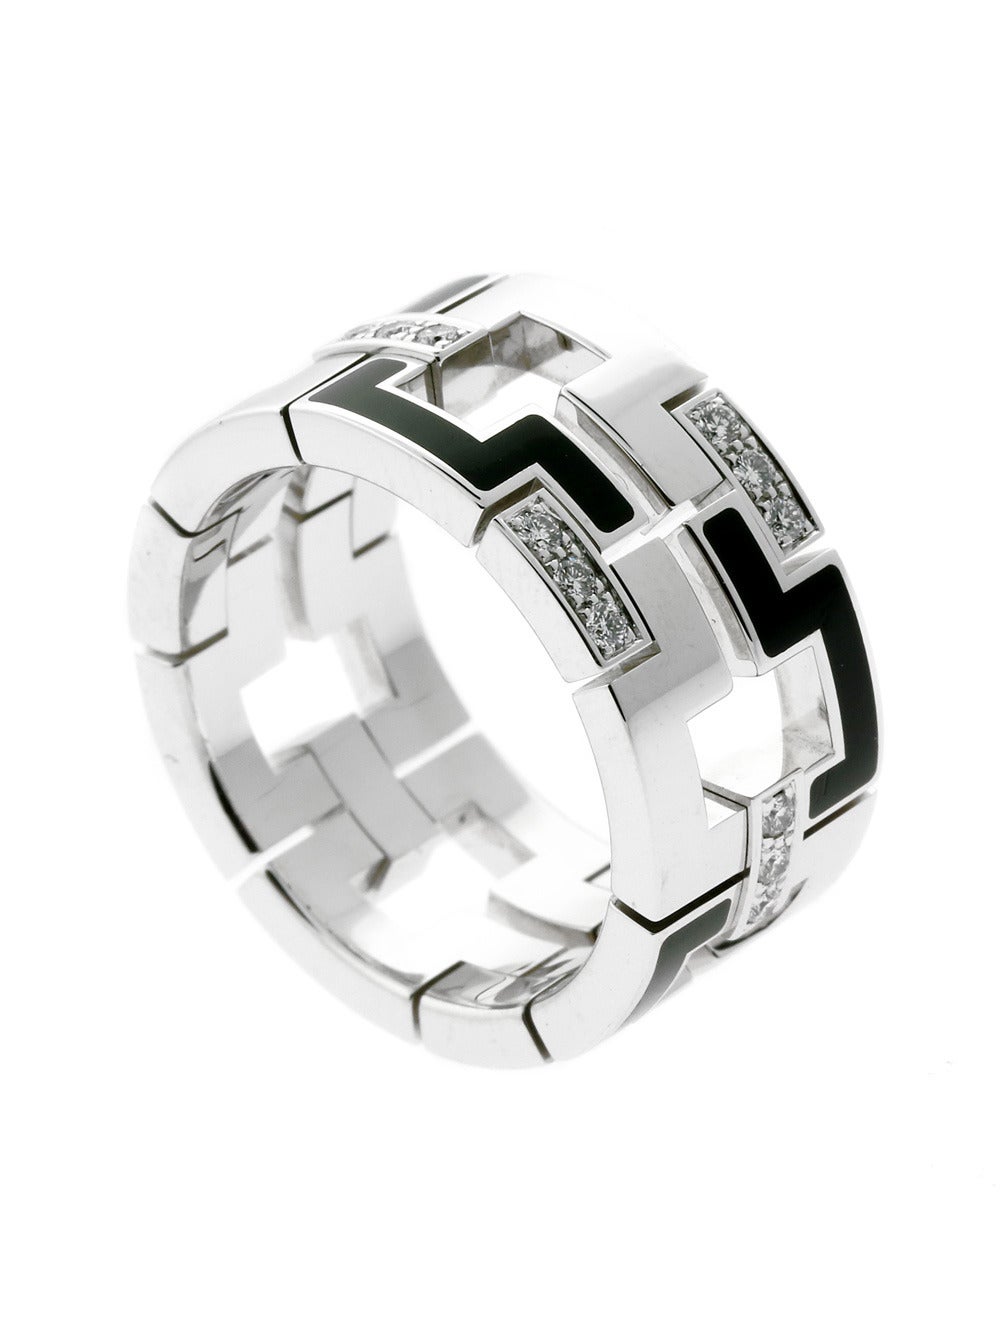 Composed of smooth 18k White Gold and boasting an engraving of the world-famous Cartier logo, this piece features an incredible amount of detail and symmetry. Artistic and attractive all at once!

The ring measures a sz 9 1/4, with a weight of